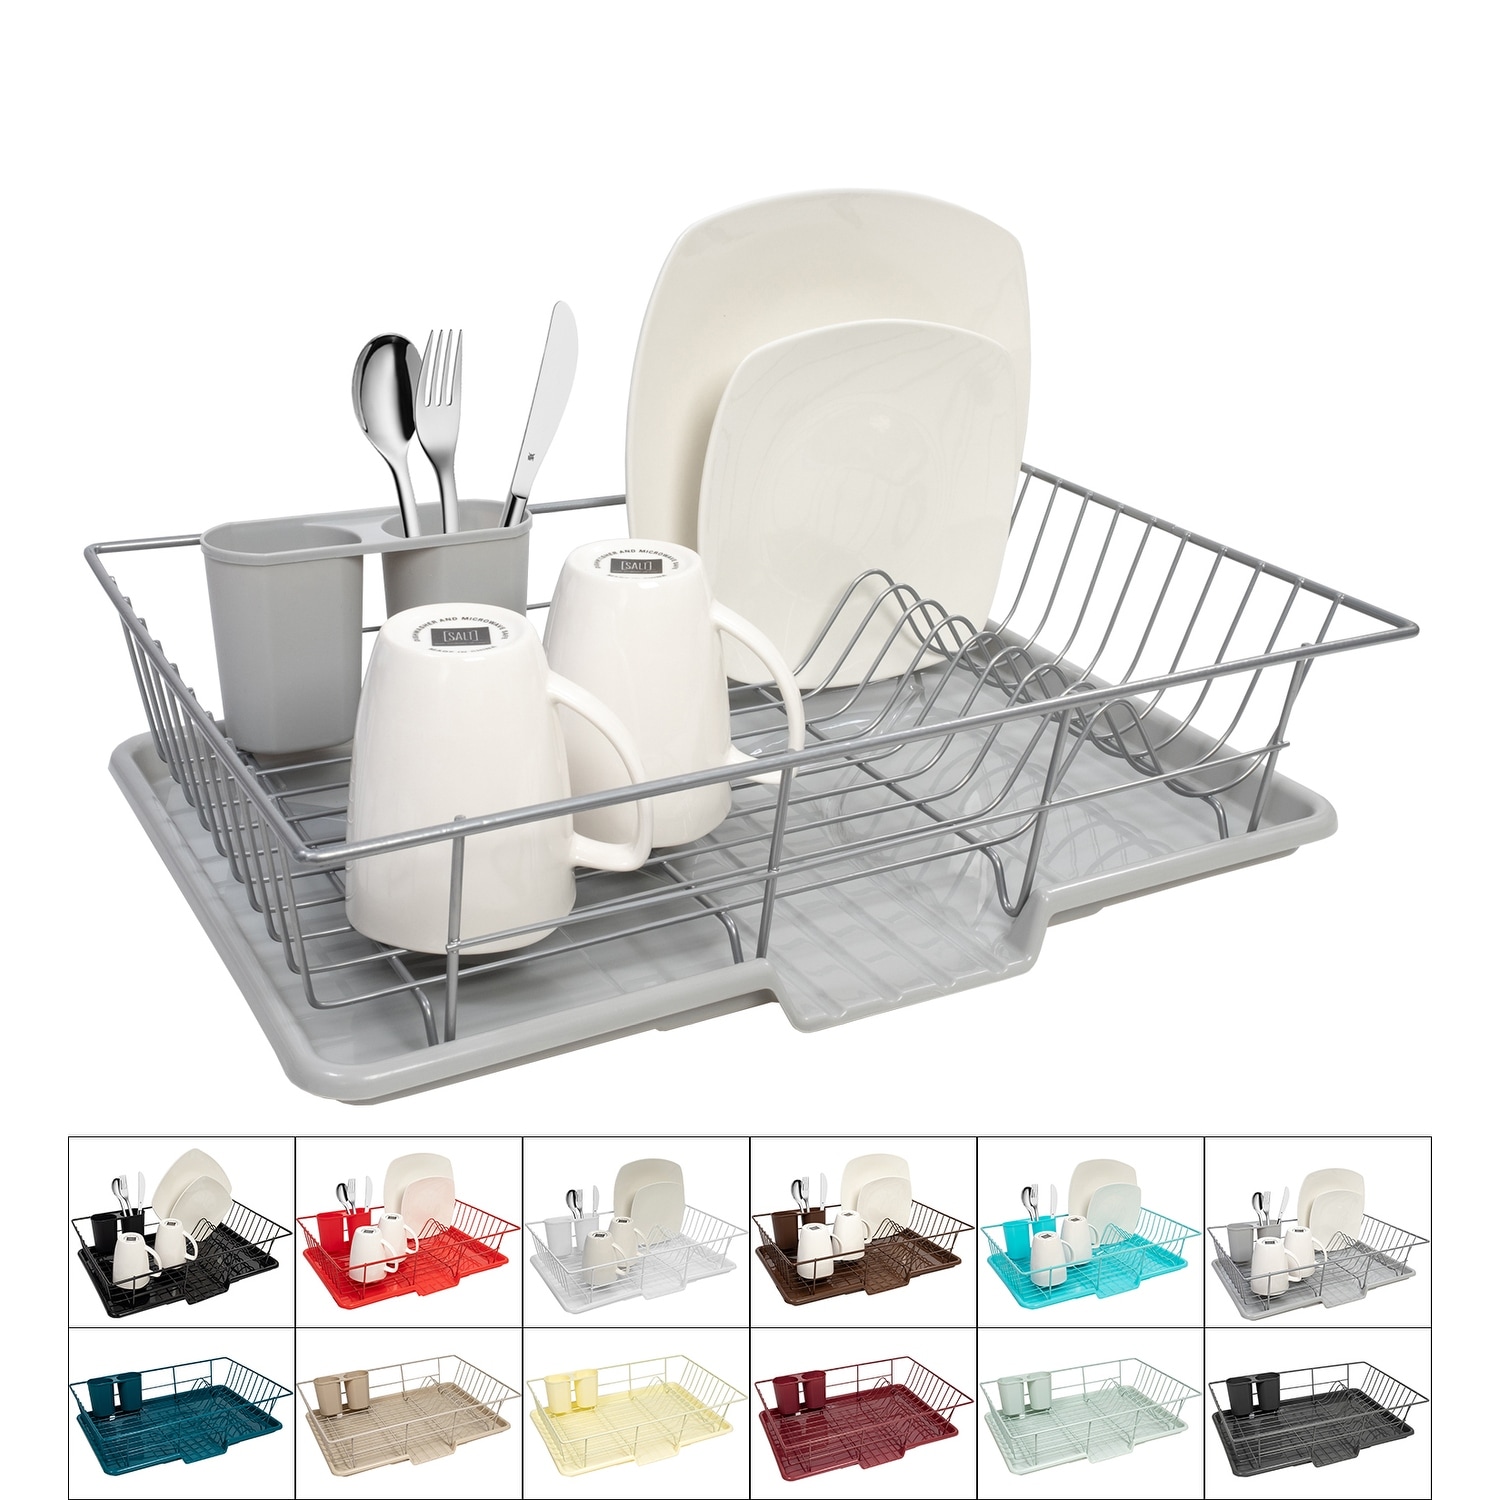 https://ak1.ostkcdn.com/images/products/is/images/direct/441c1202a8e1b31bb07ec43078bd66063df04ded/Sweet-Home-Collection-3-Piece-Kitchen-Sink-Dish-Drainer-Set.jpg